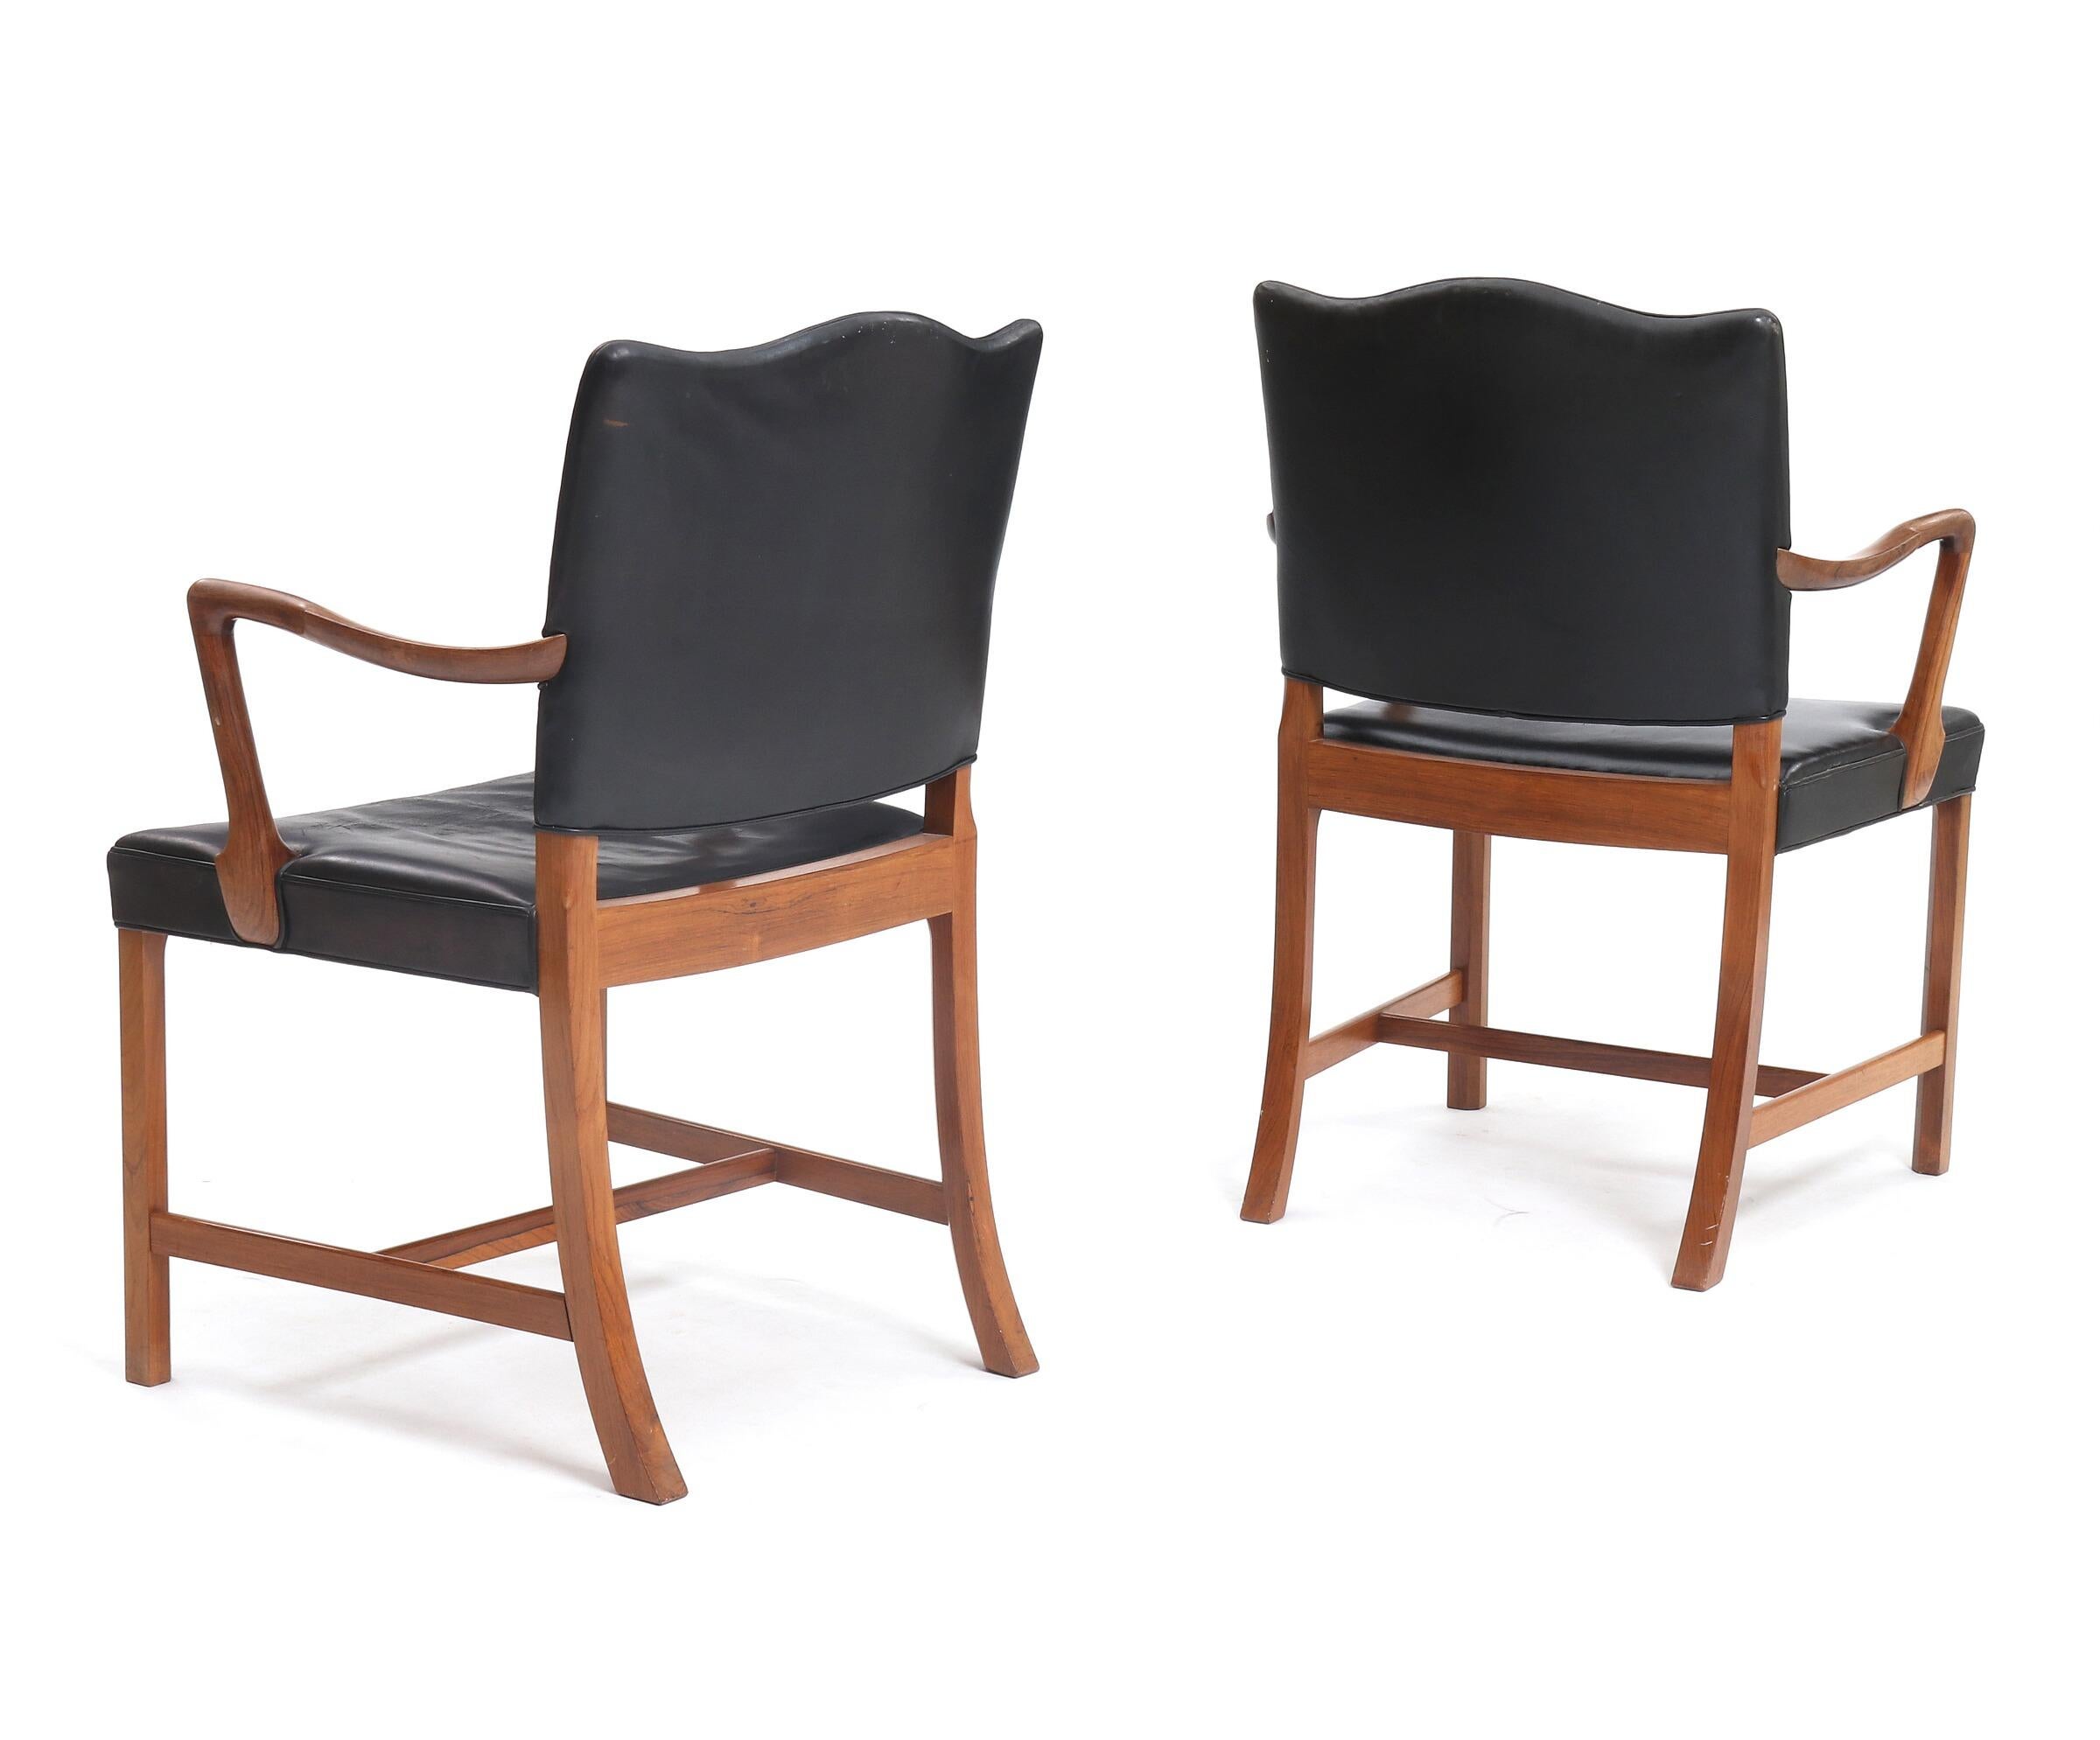 A pair of rosewood armchairs designed by Ole Wanscher. Made and marked with label by cabinetmaker A.J. Iversen.

Leather of seat and back of one chair is original. 
Leather of seat and back of one chair has been reupholstered in matching black